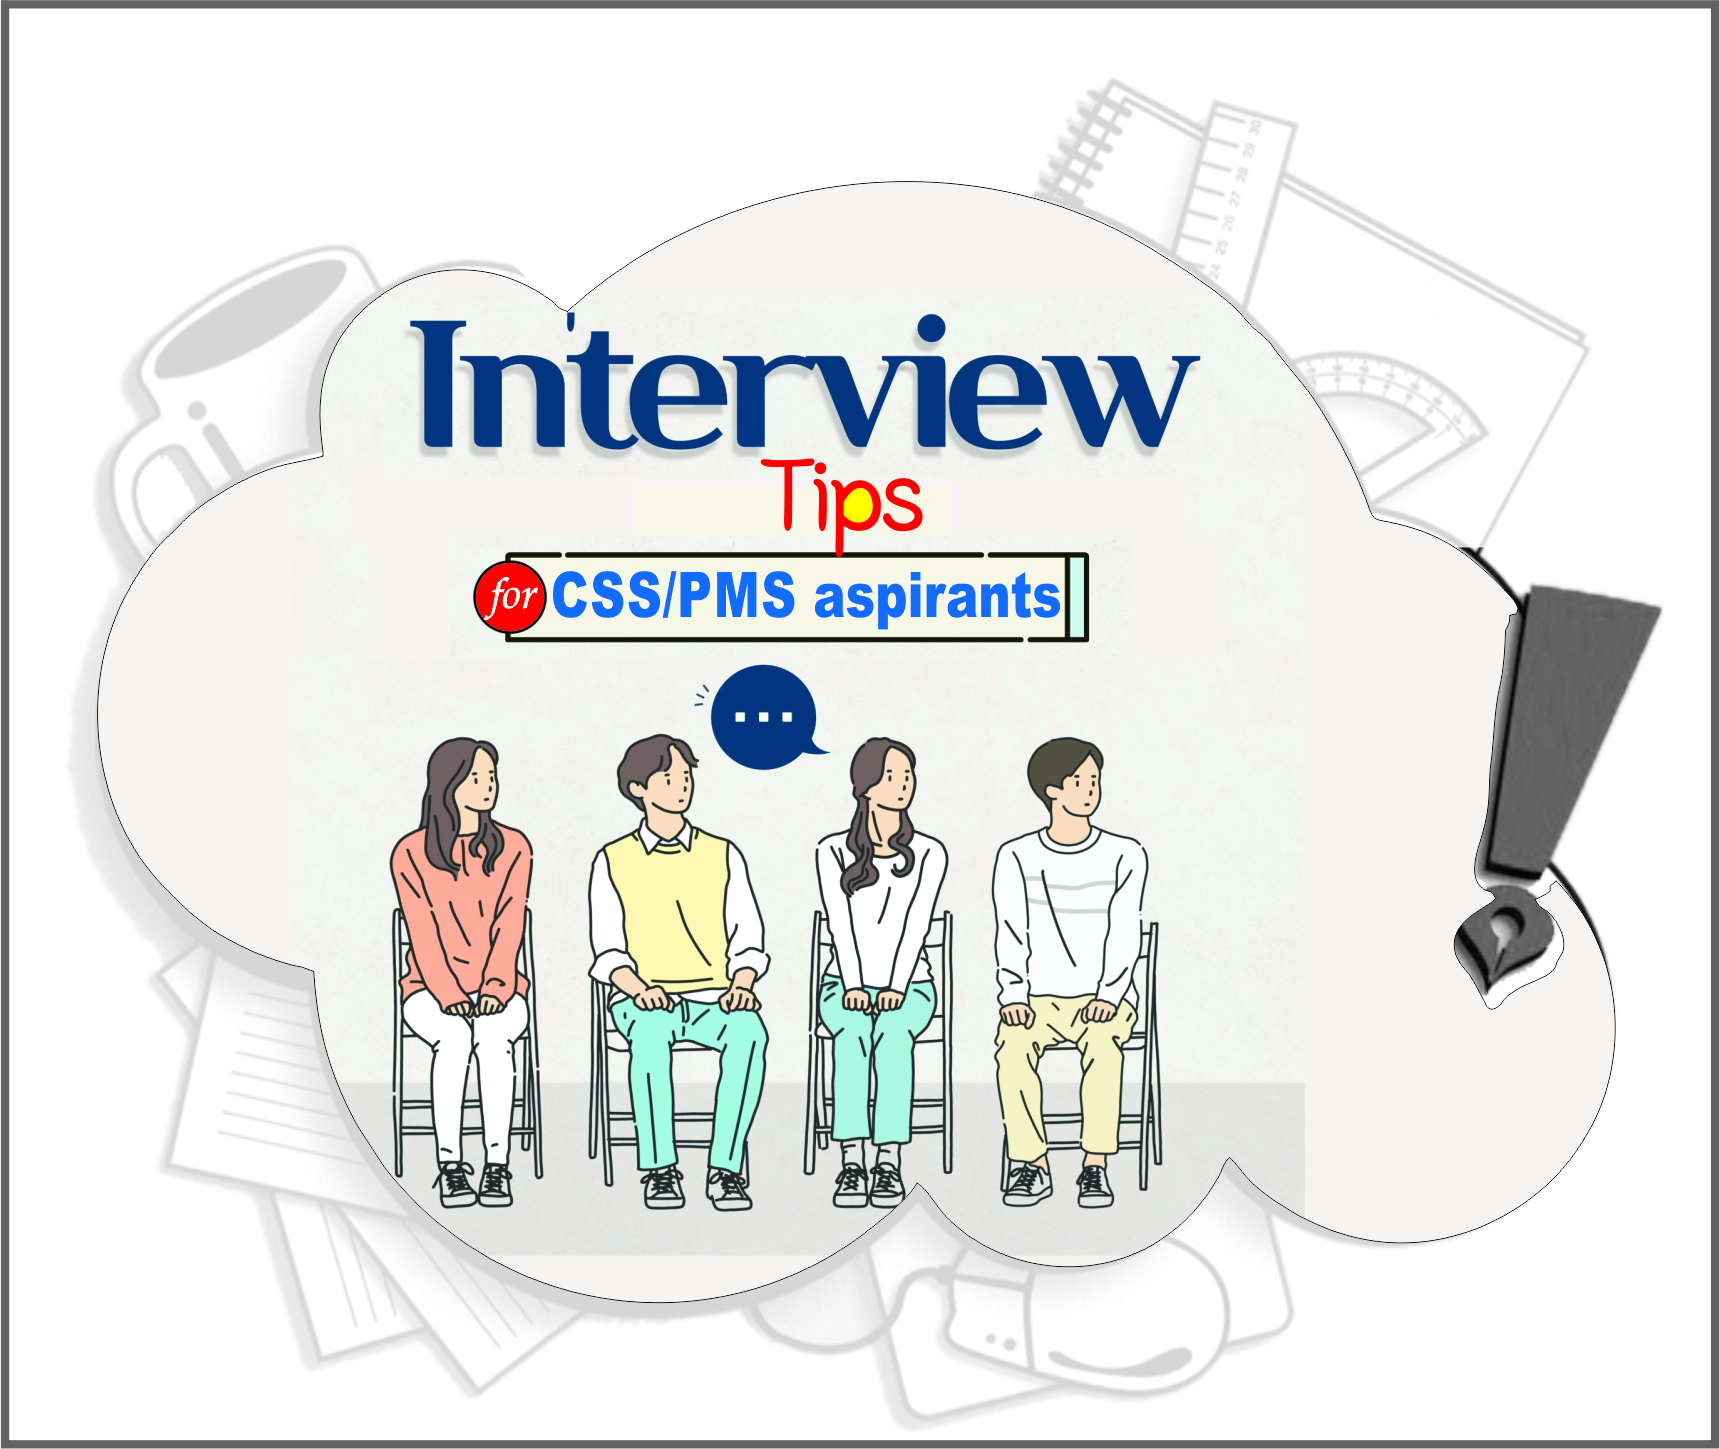 You are currently viewing Interview Tips for CSS/PMS Aspirants